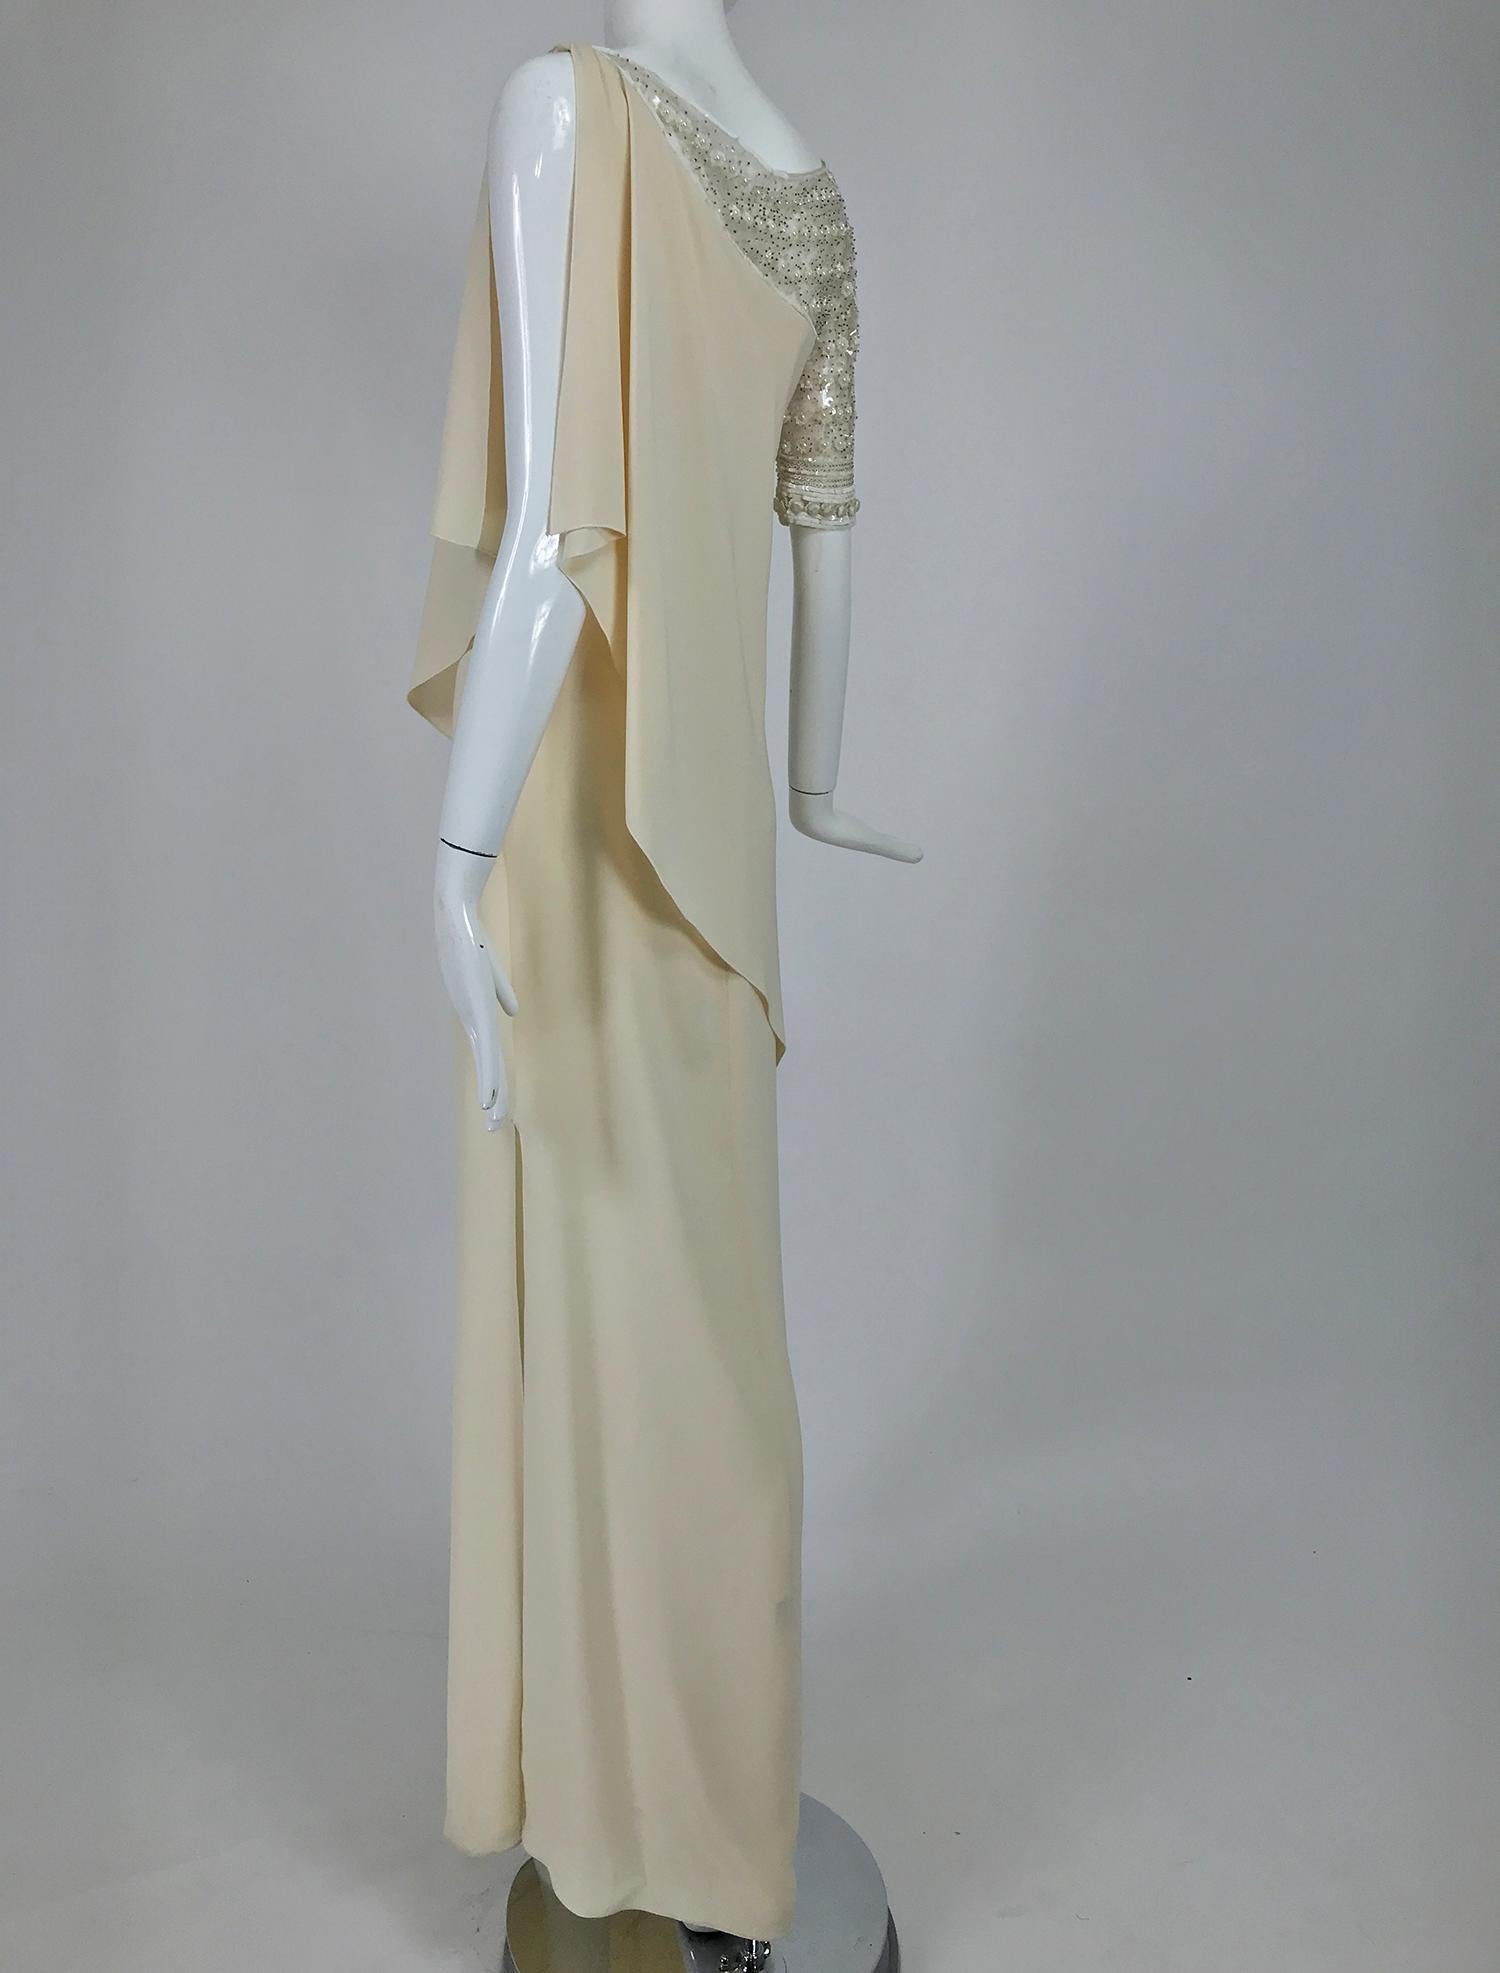 Valentino Beaded Chiffon Gown Worn By Marie-Chantal Miller at Valentino's 45th In Good Condition In West Palm Beach, FL